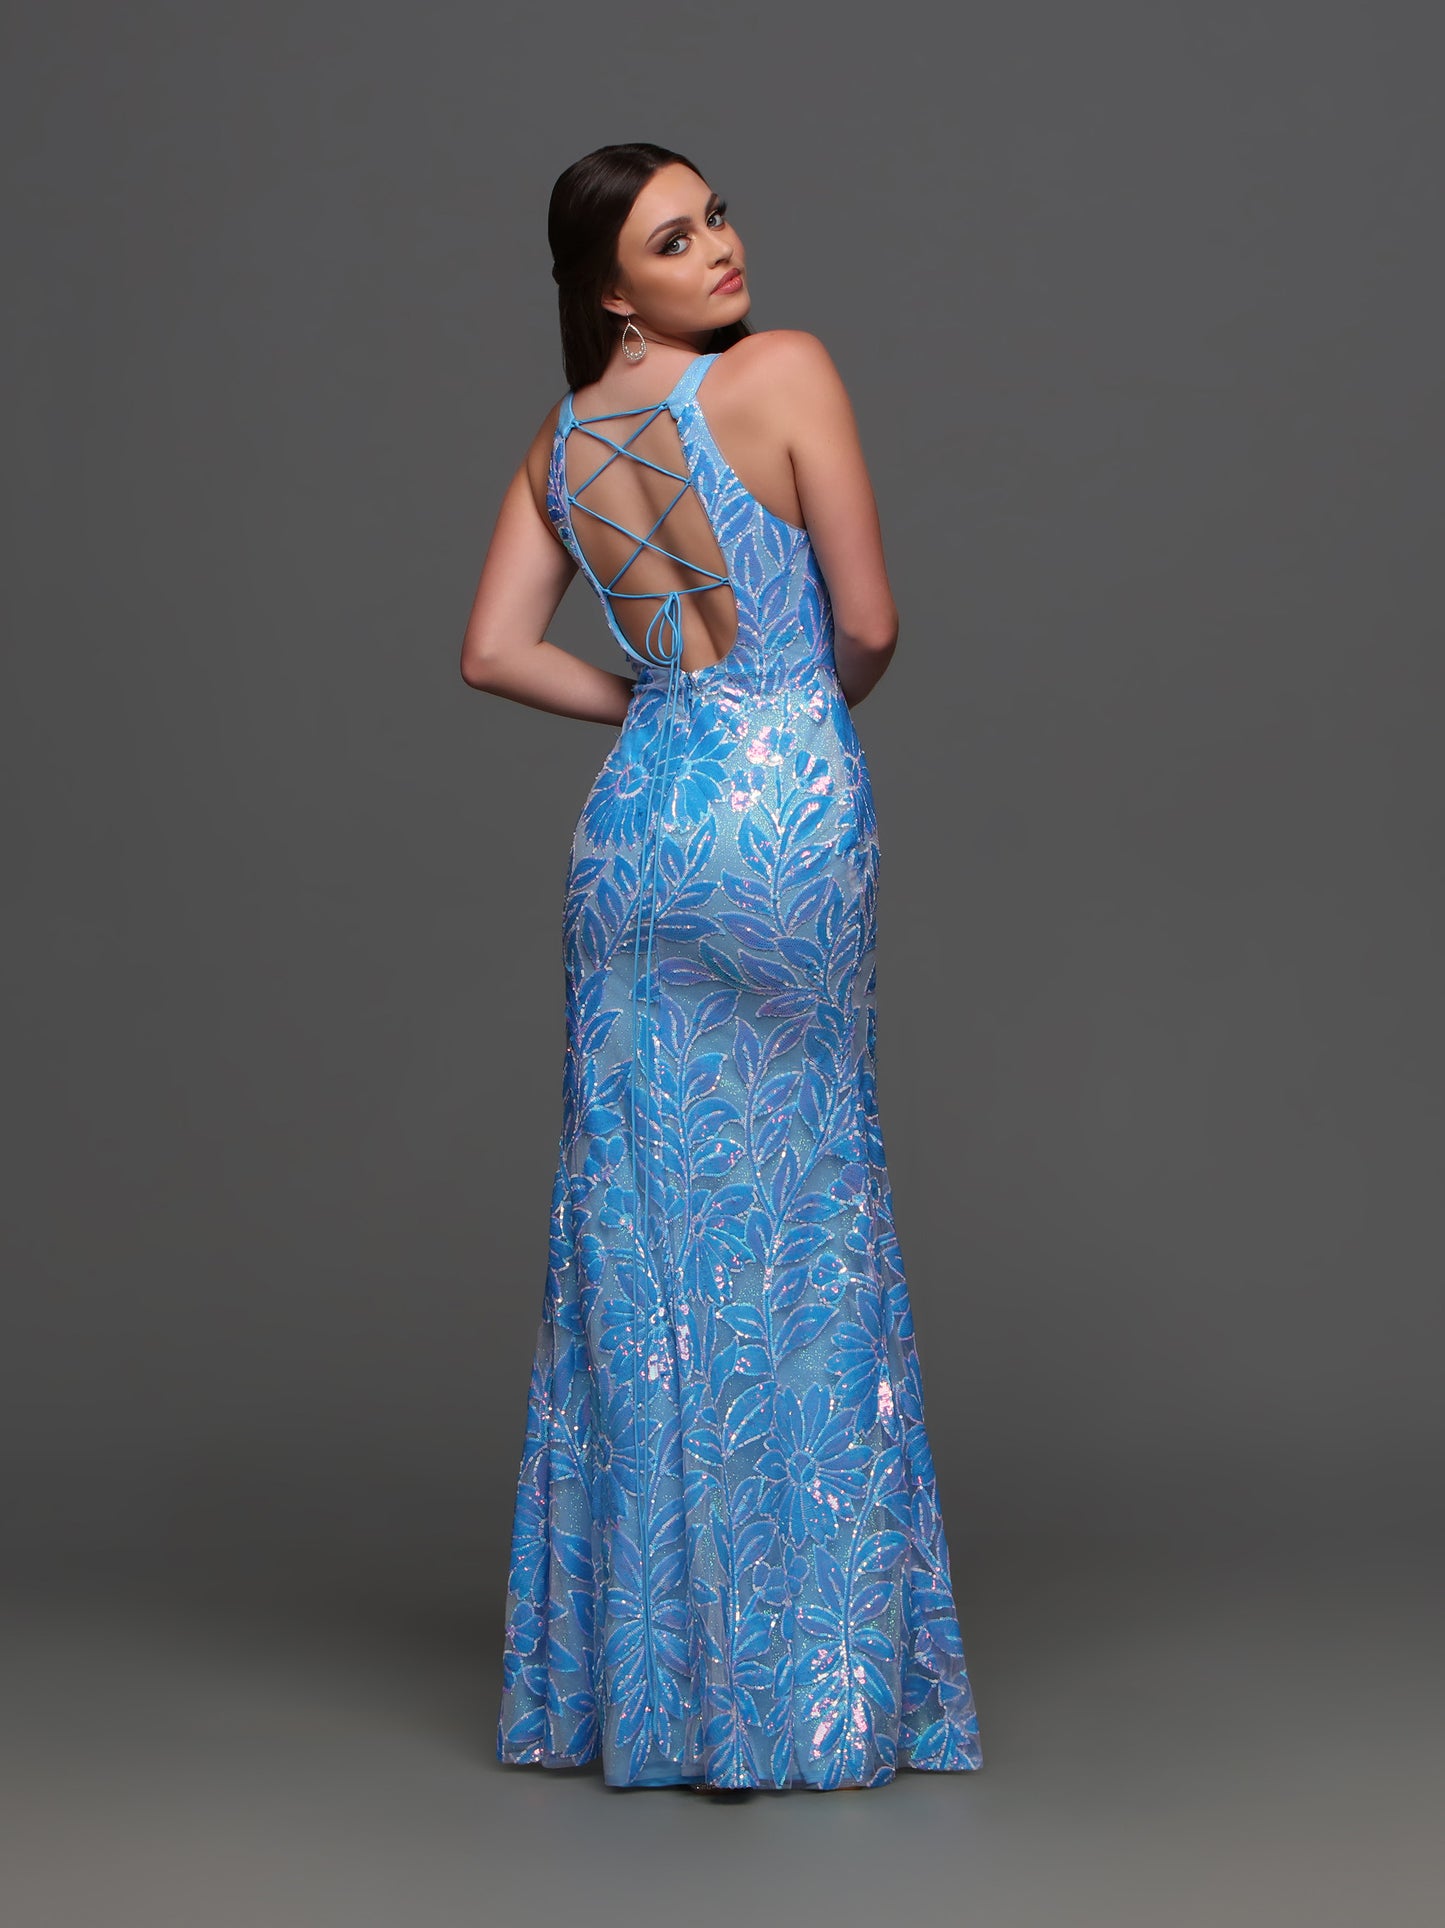 Step into the spotlight with the Candice Wang 72404 Shimmer Sequin High Neck Prom Dress. The backless corset design and high neckline create a stylish and elegant look, while the shimmering sequins add a touch of glamour. The slit gown ensures comfort while dancing the night away. Perfect for making a statement at prom or any special occasion.  Sizes: 0-16  Colors: Blue, Neon Pink